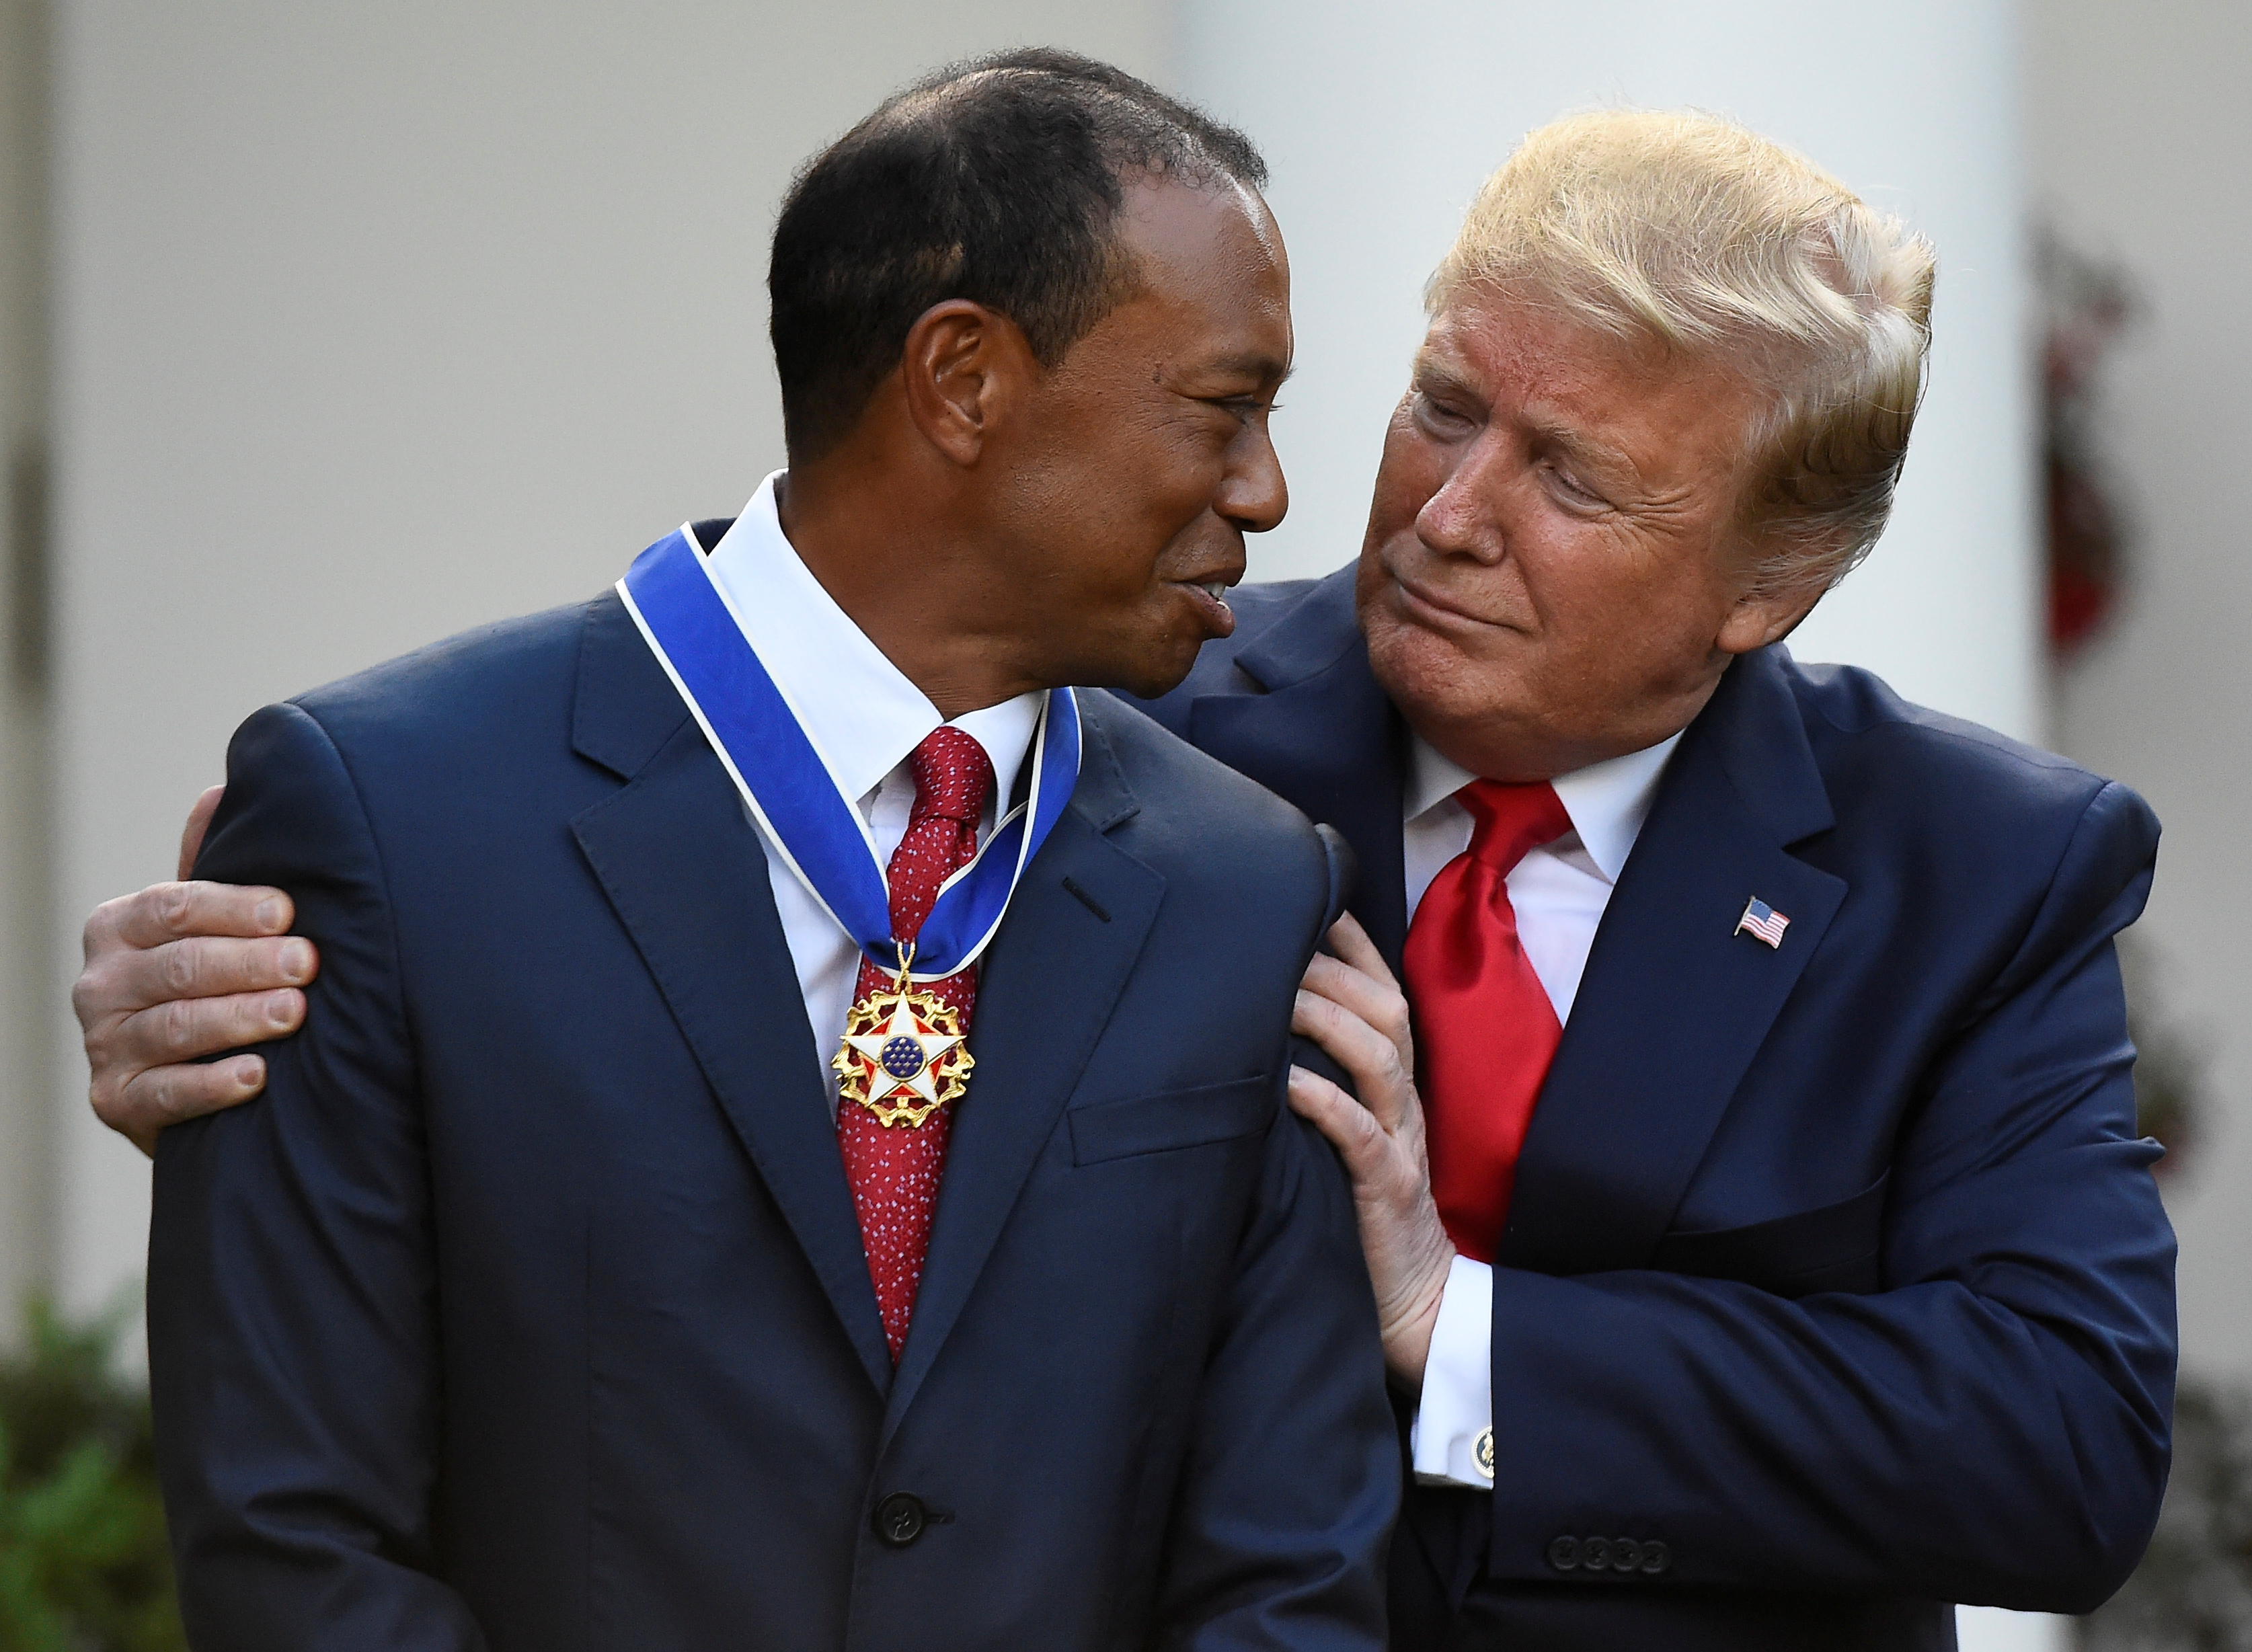 Tiger Woods and Donald Trump.